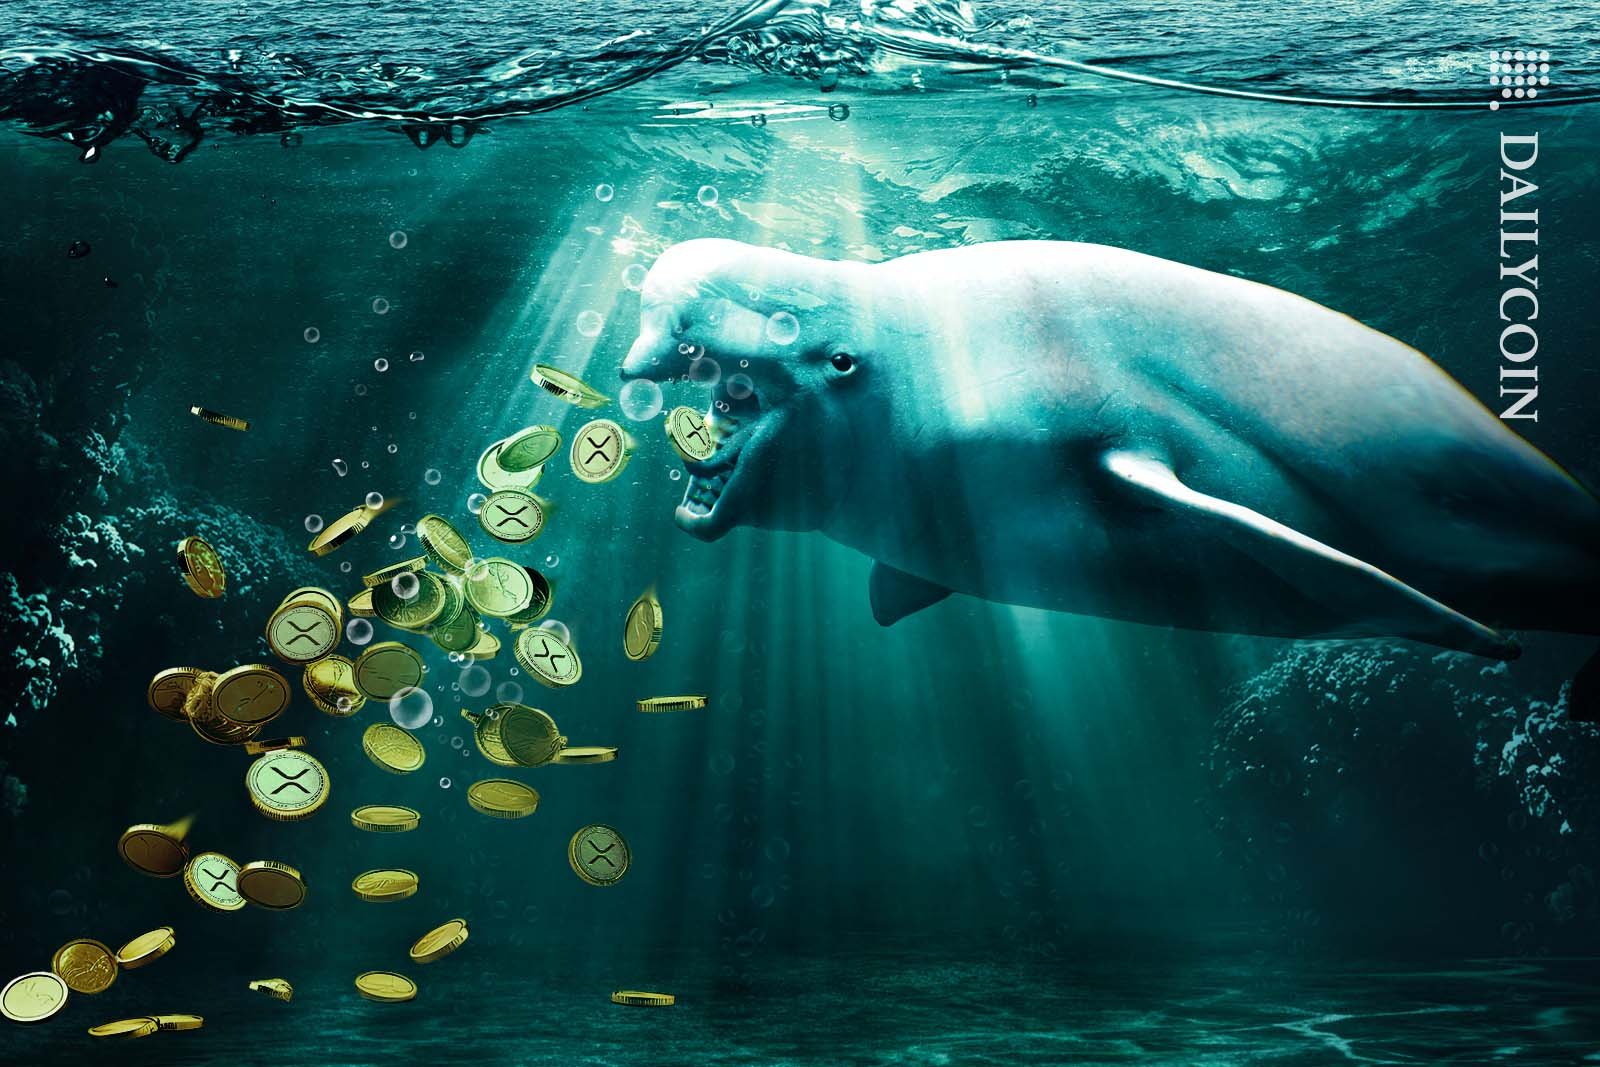 Beluga whale throwing up XRP coins under water.